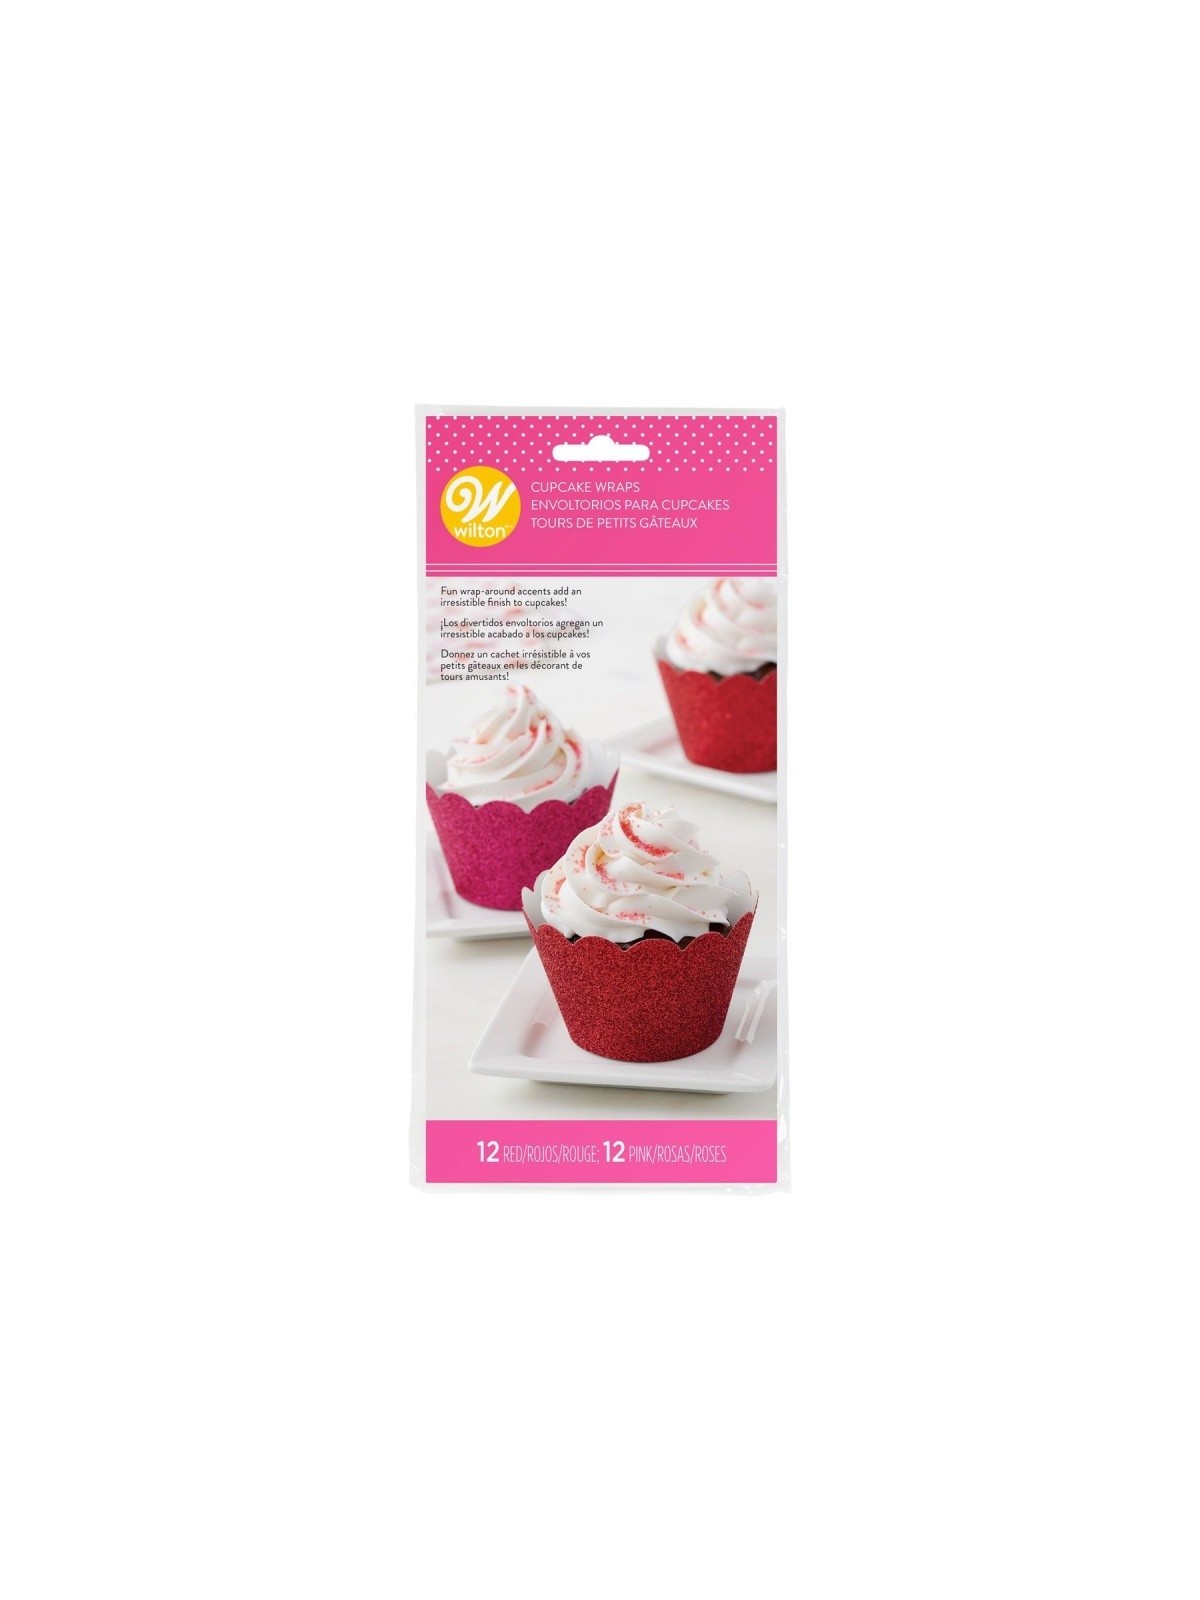 Wilton Stars Cupcake Wrappers red and pink glitter - 24pcs